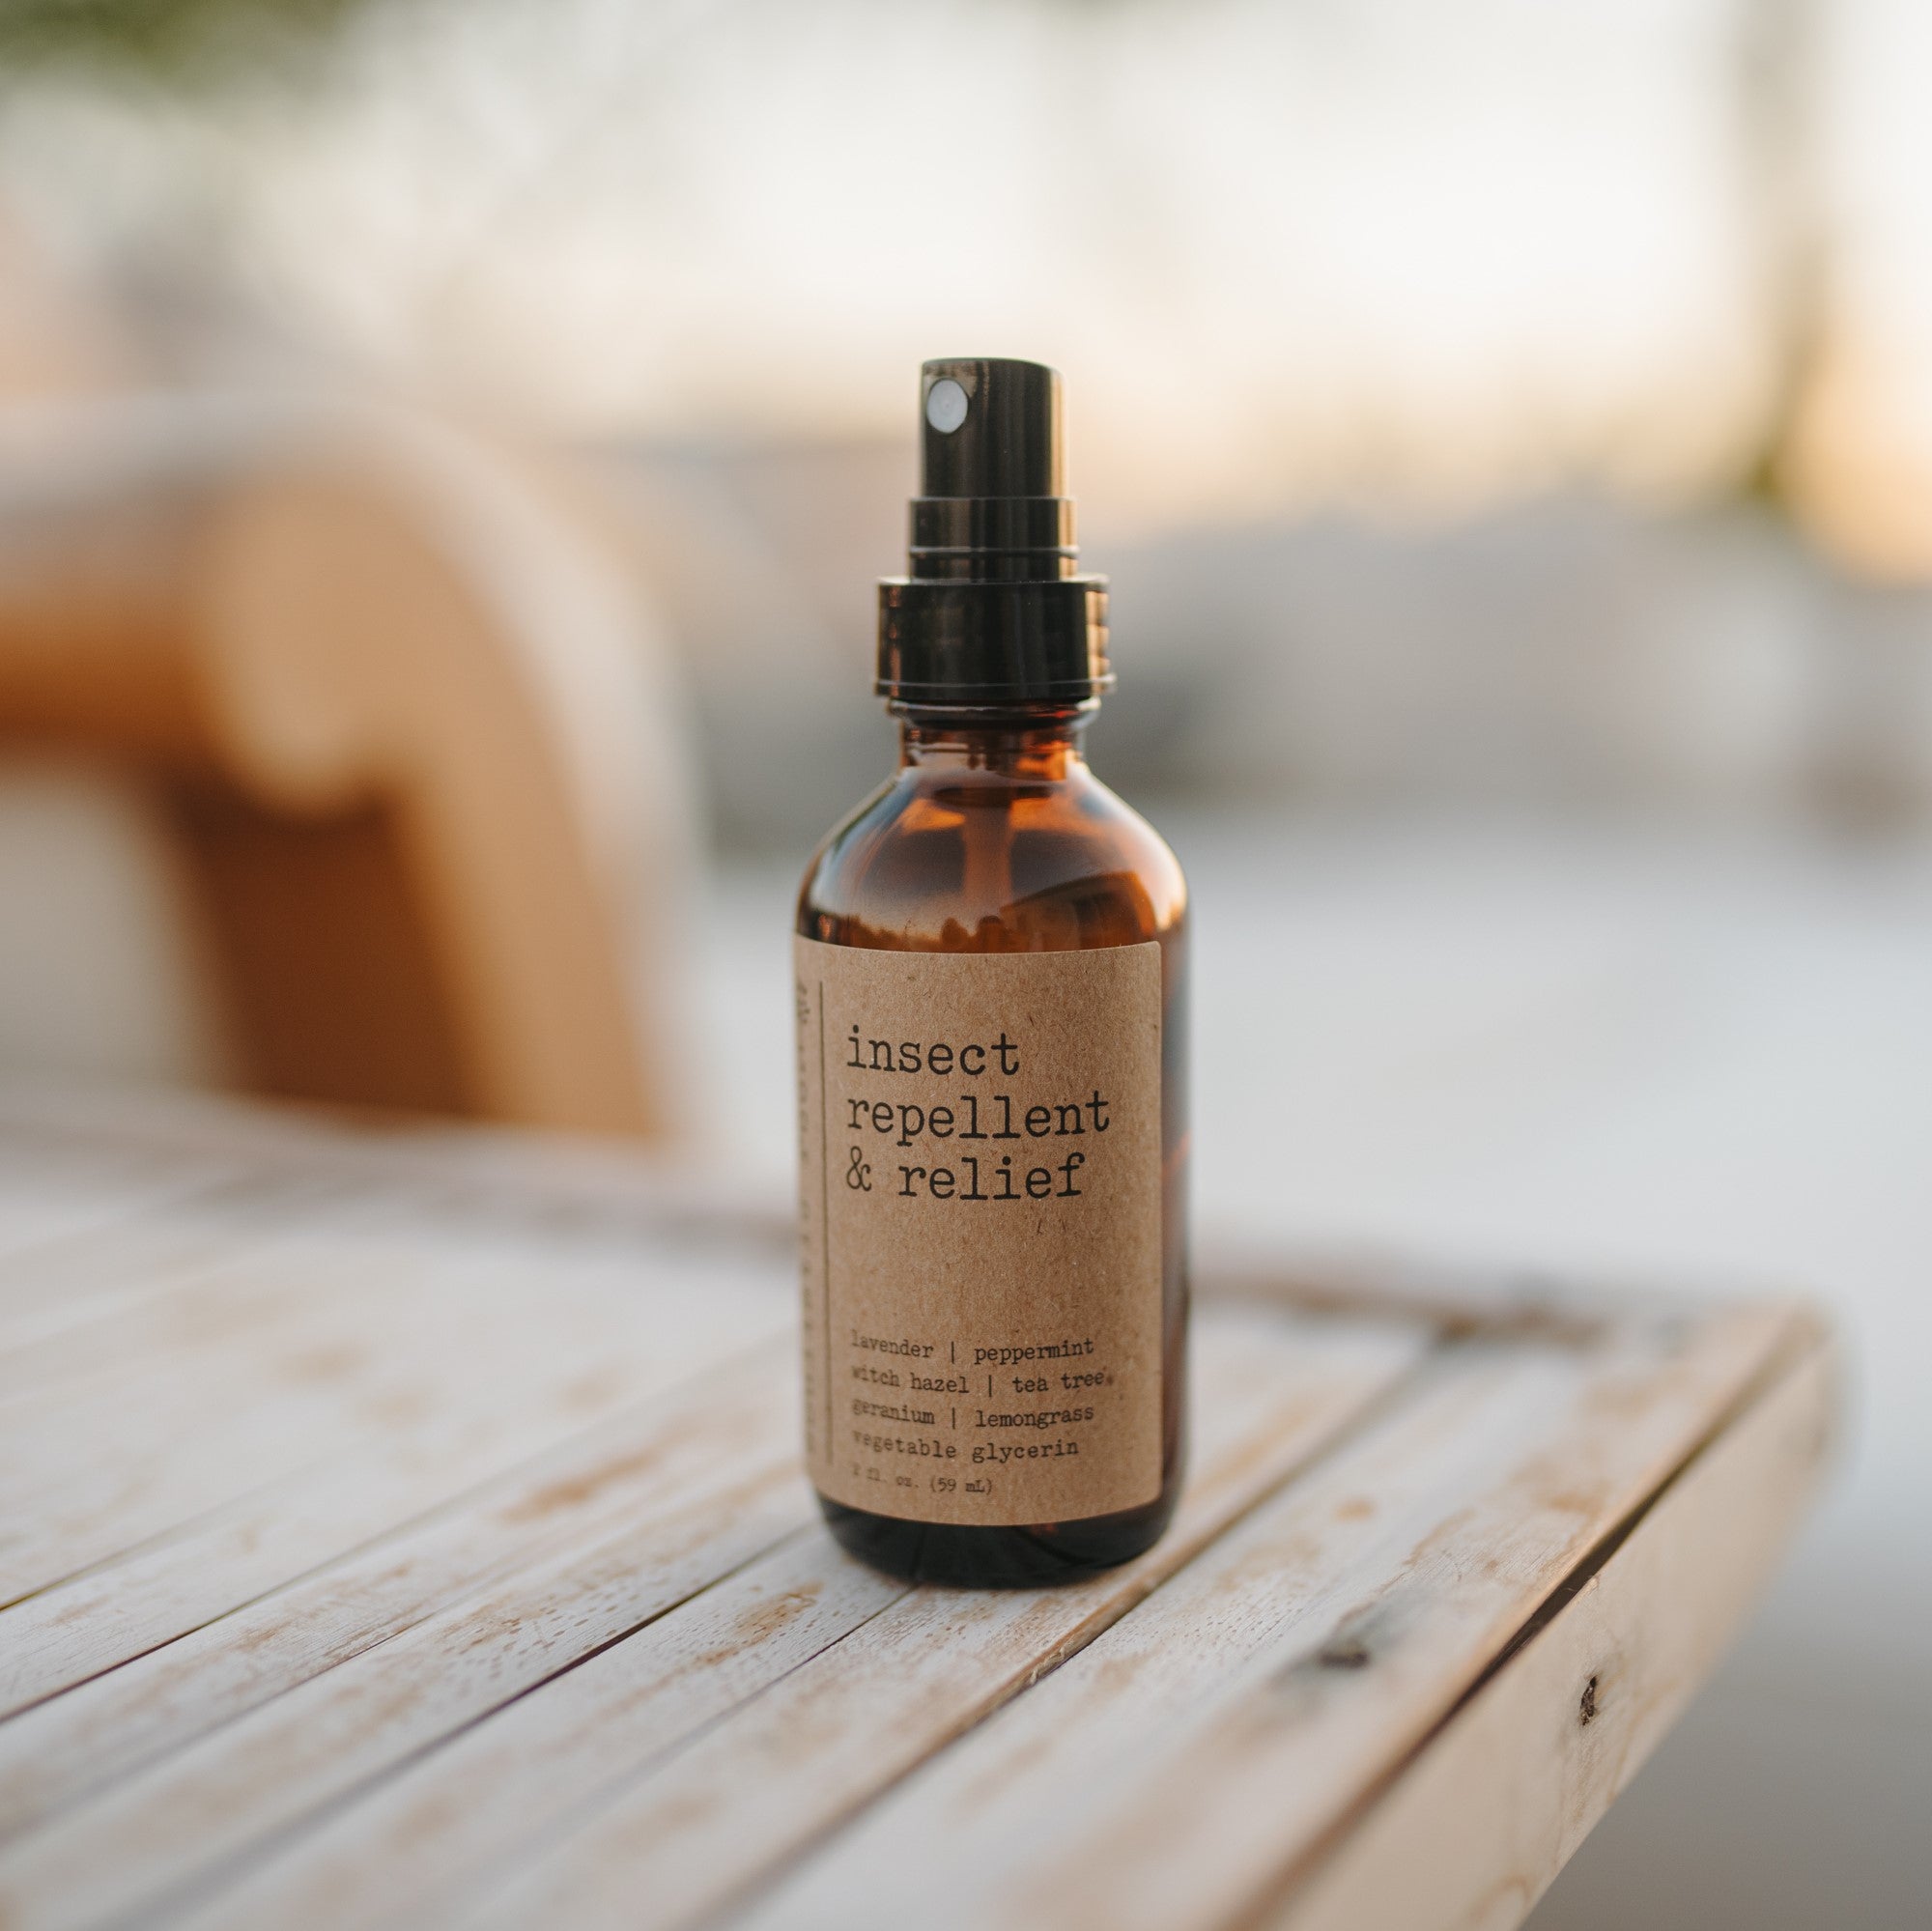 Natural bug spray & bug bite relief 2 oz amber spray bottle sitting outside on a wooden lounge chair